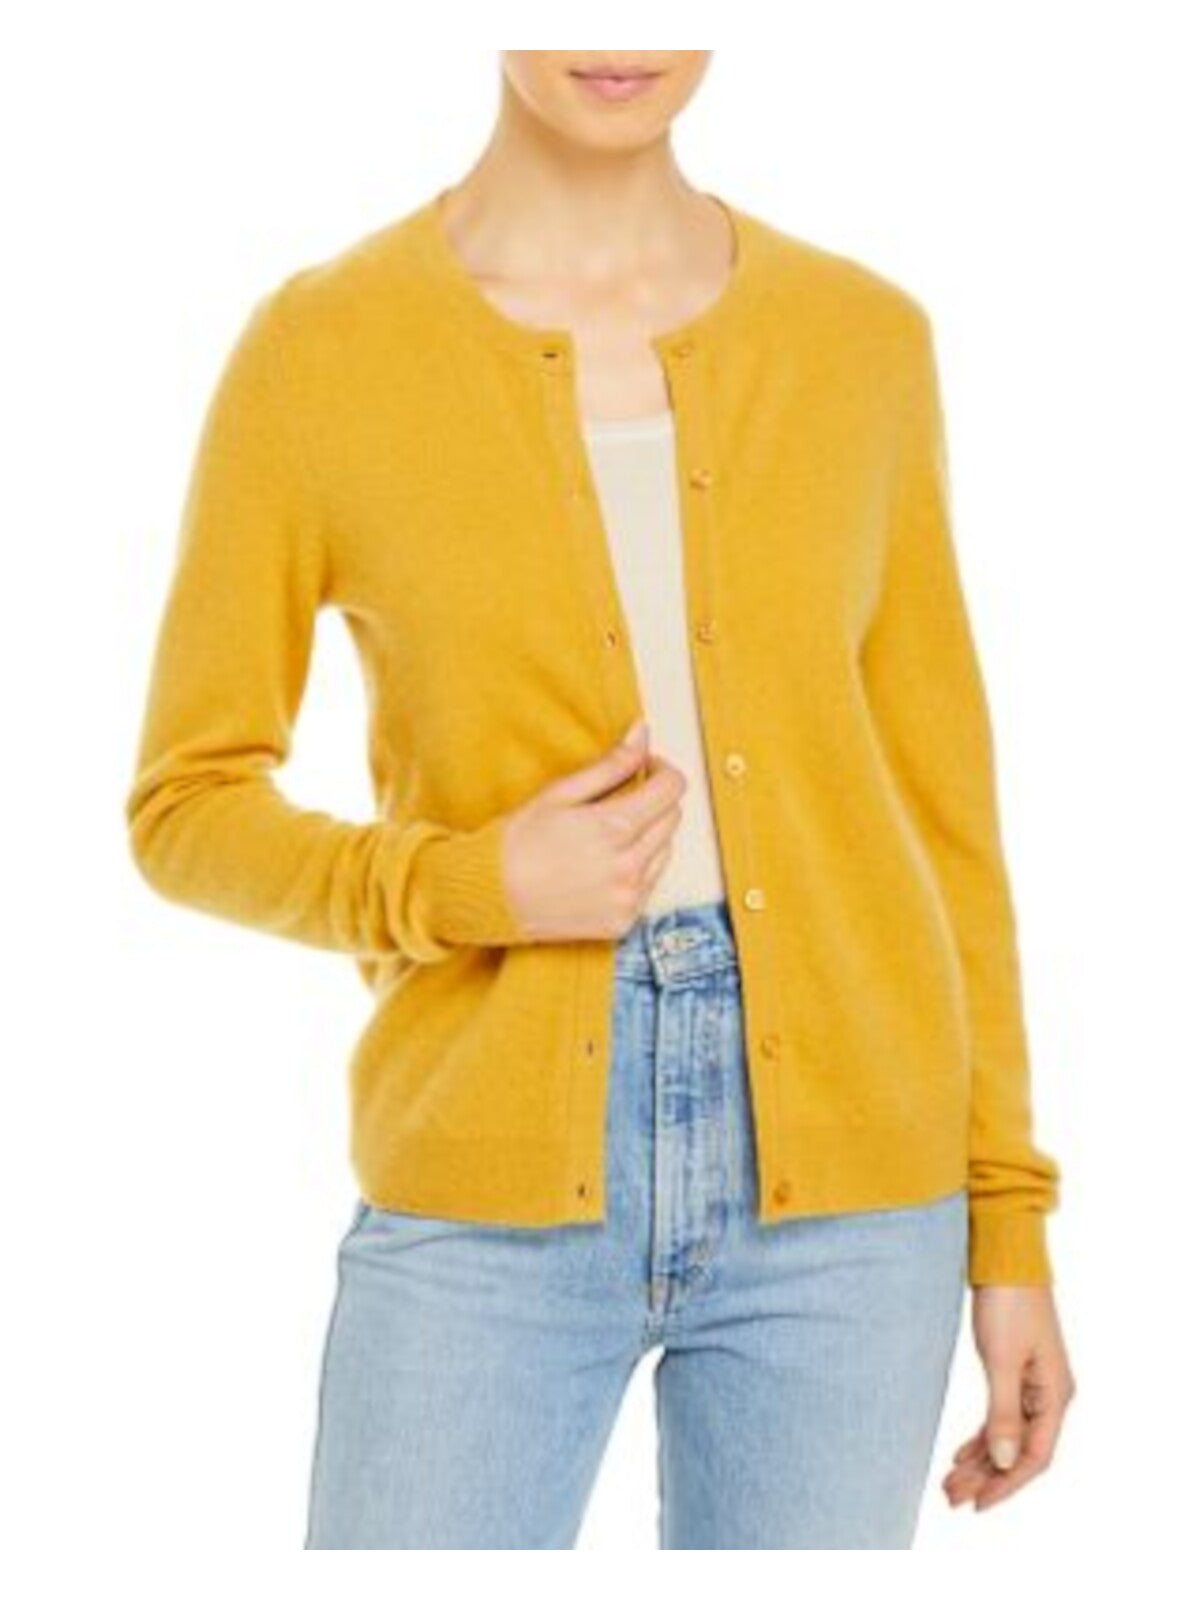 Designer Brand Womens Gold Cashmere Long Sleeve Crew Neck Wear To Work Button Up Sweater M